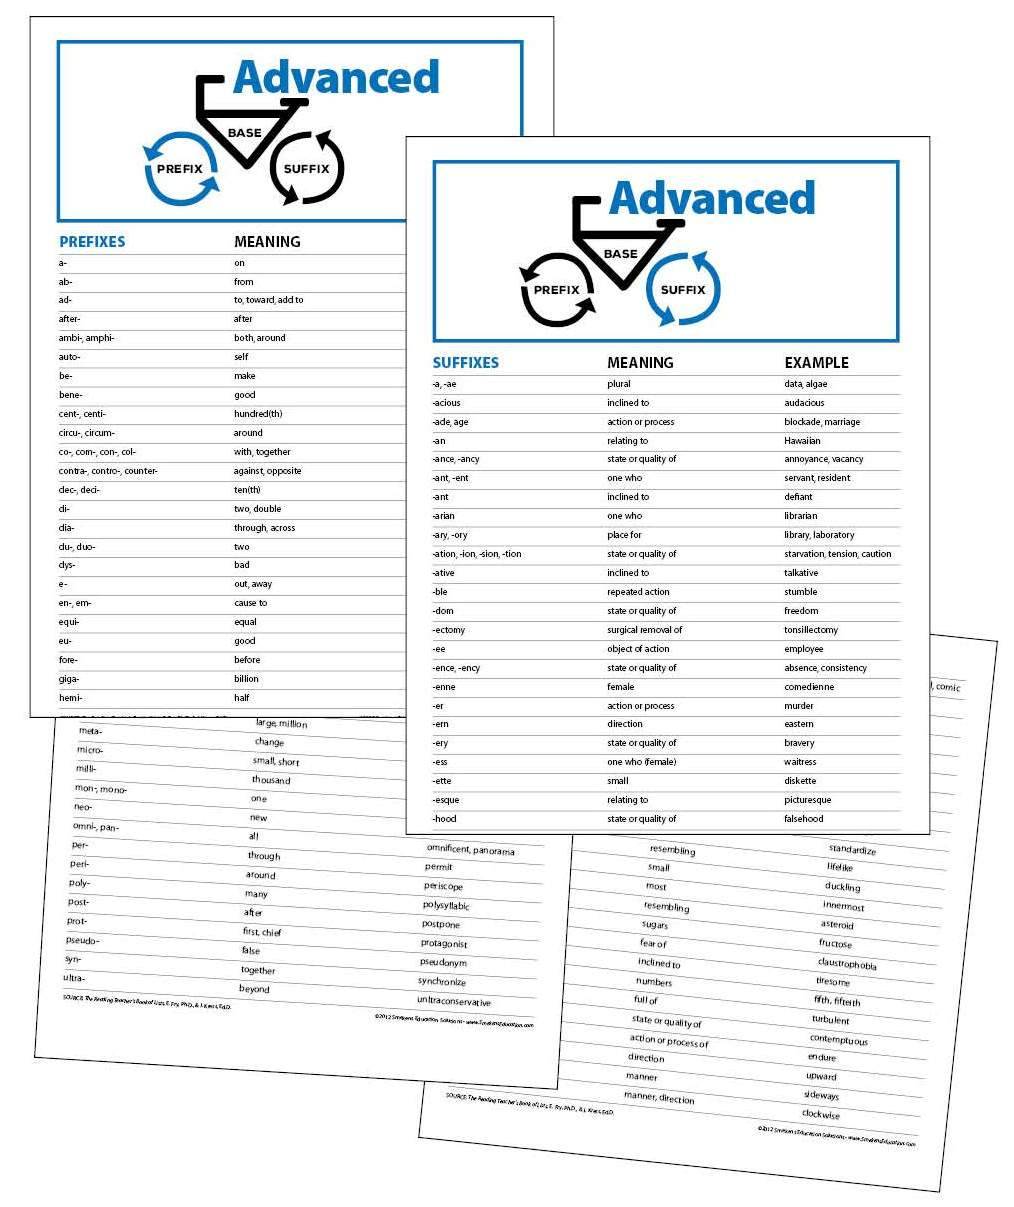 Advanced List of Word Roots